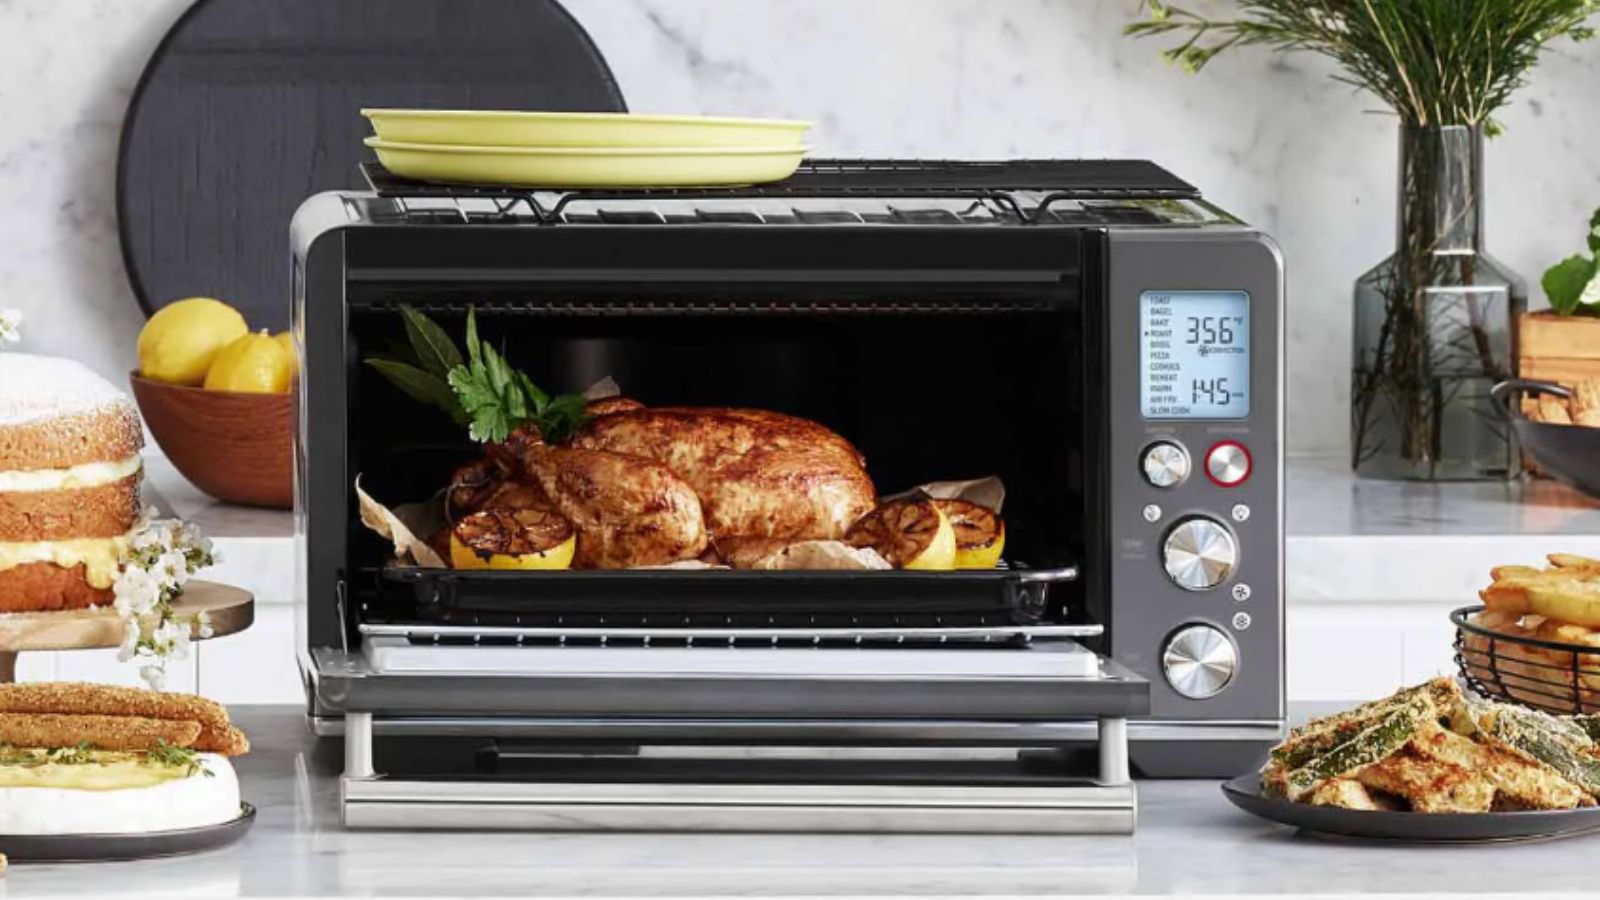 Where To Buy Breville Toaster Ovens